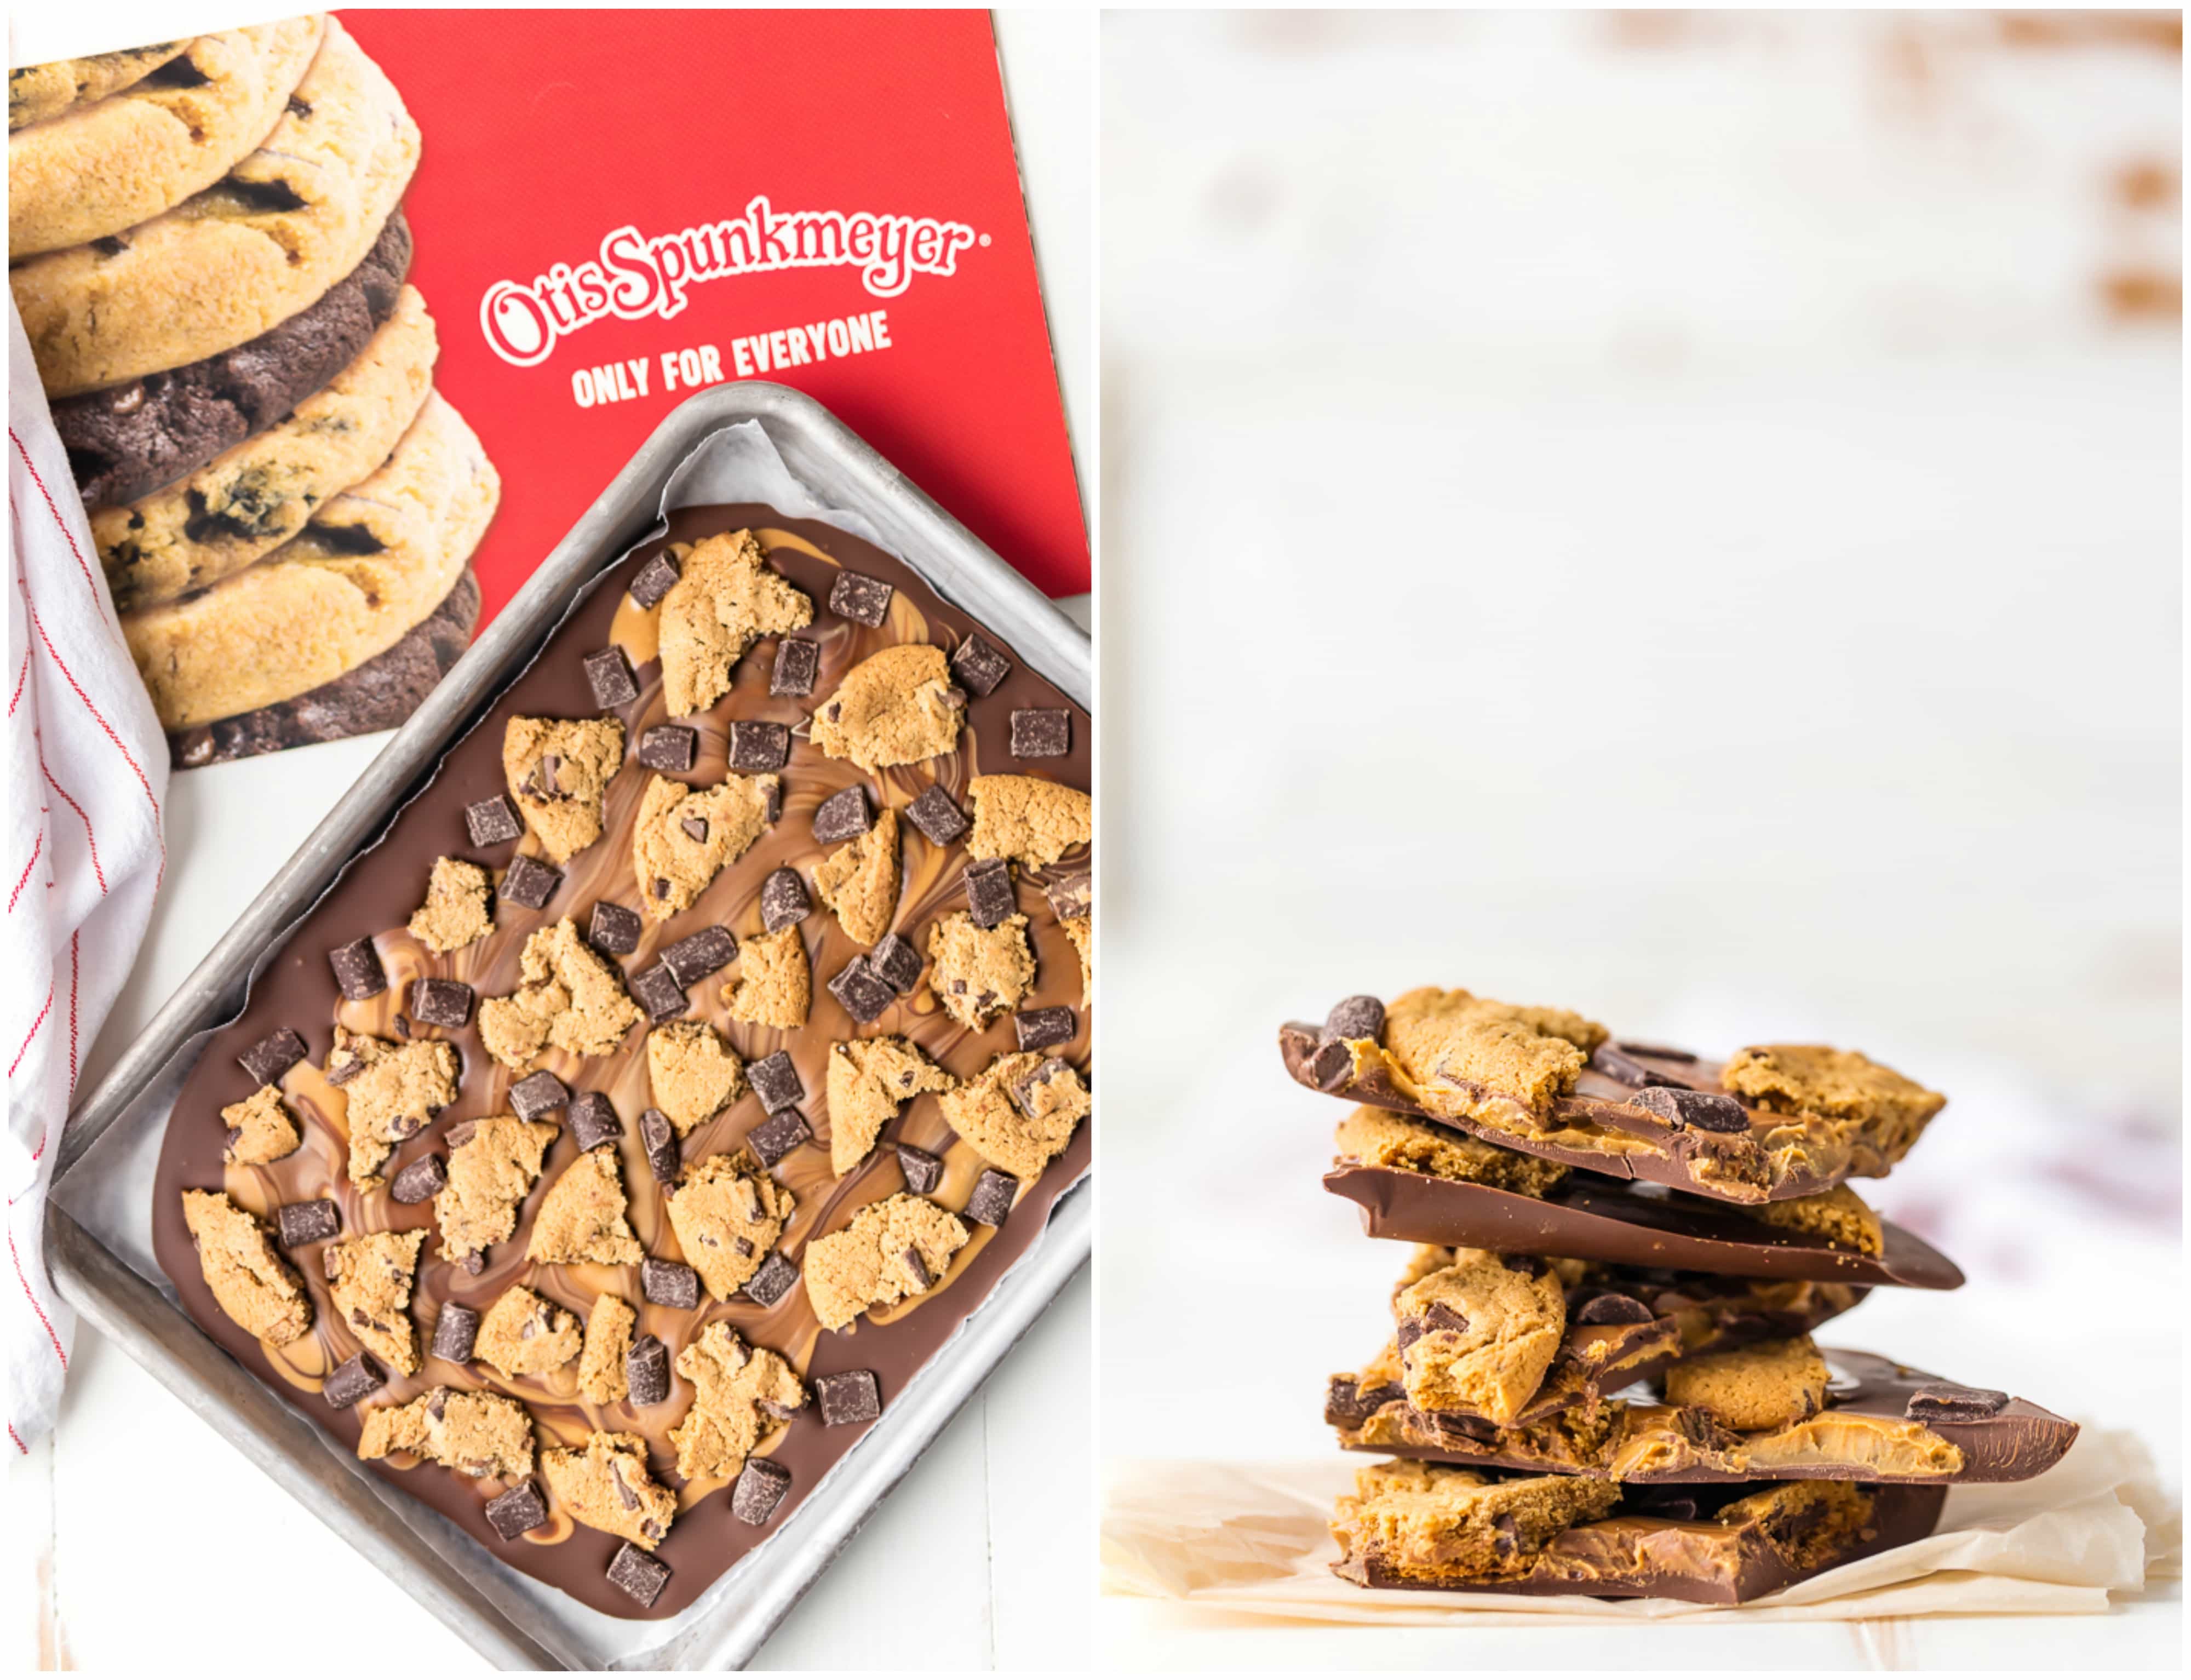 Peanut Butter Chocolate Chip Cookie Bark is the ULTIMATE easy dessert recipe! Only 4 ingredients stand between you and this party favorite. Loaded with peanut butter, milk chocolate, dark chocolate chunks, and chocolate chip cookies! Great last minute sweet treat for tailgating.